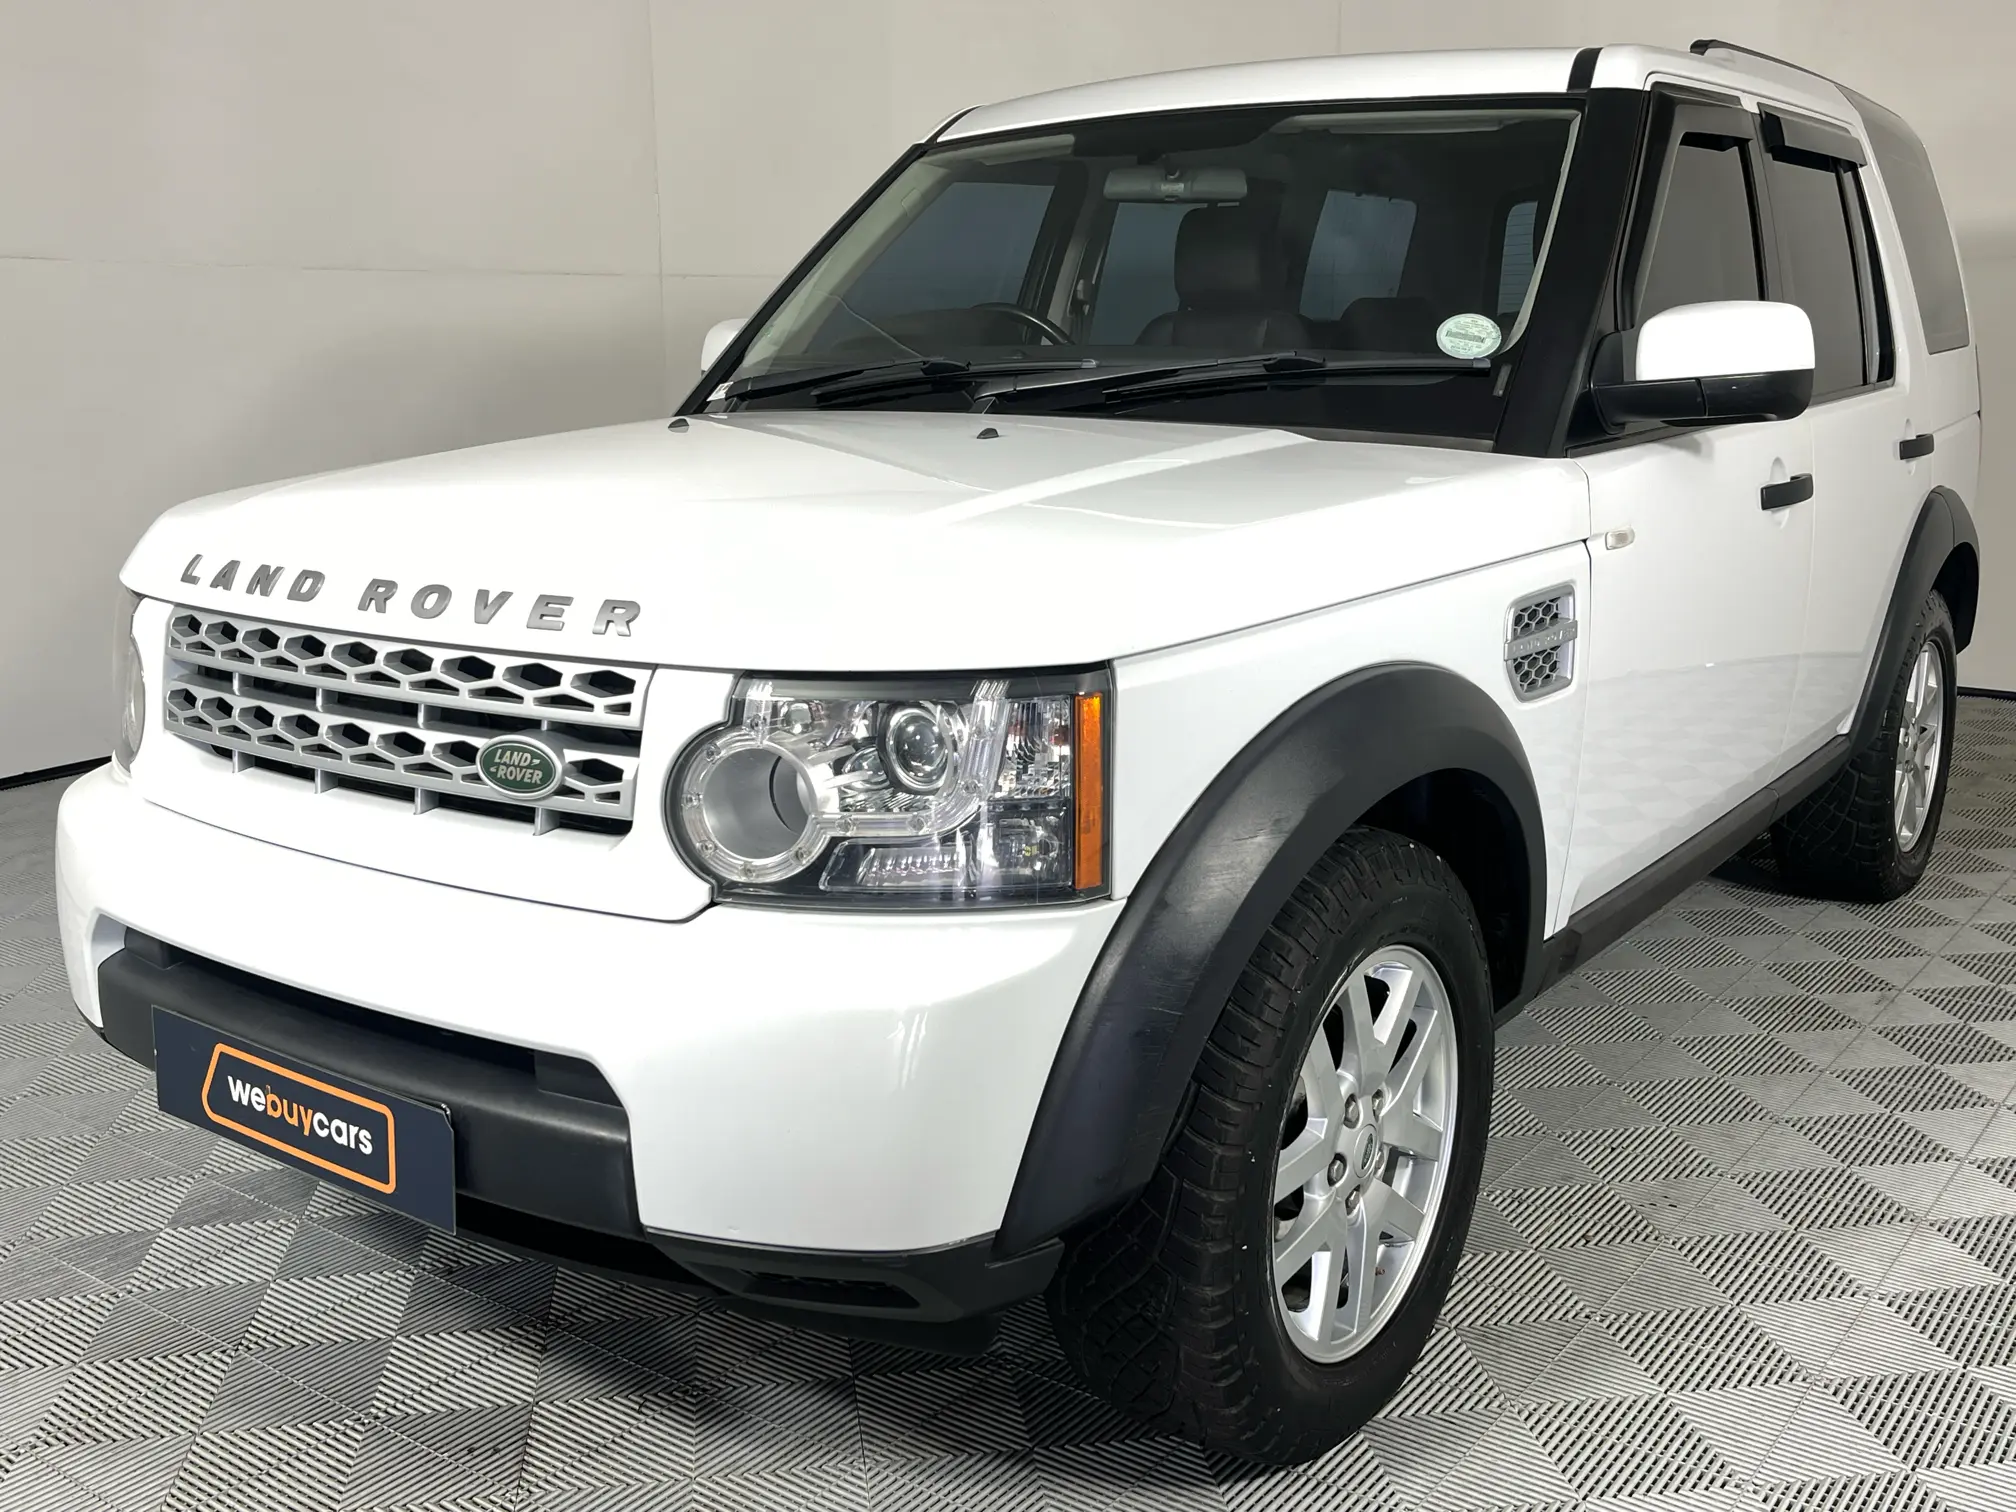 2014 Land Rover Discovery 4 3.0 TD V6 XS (155 KW)